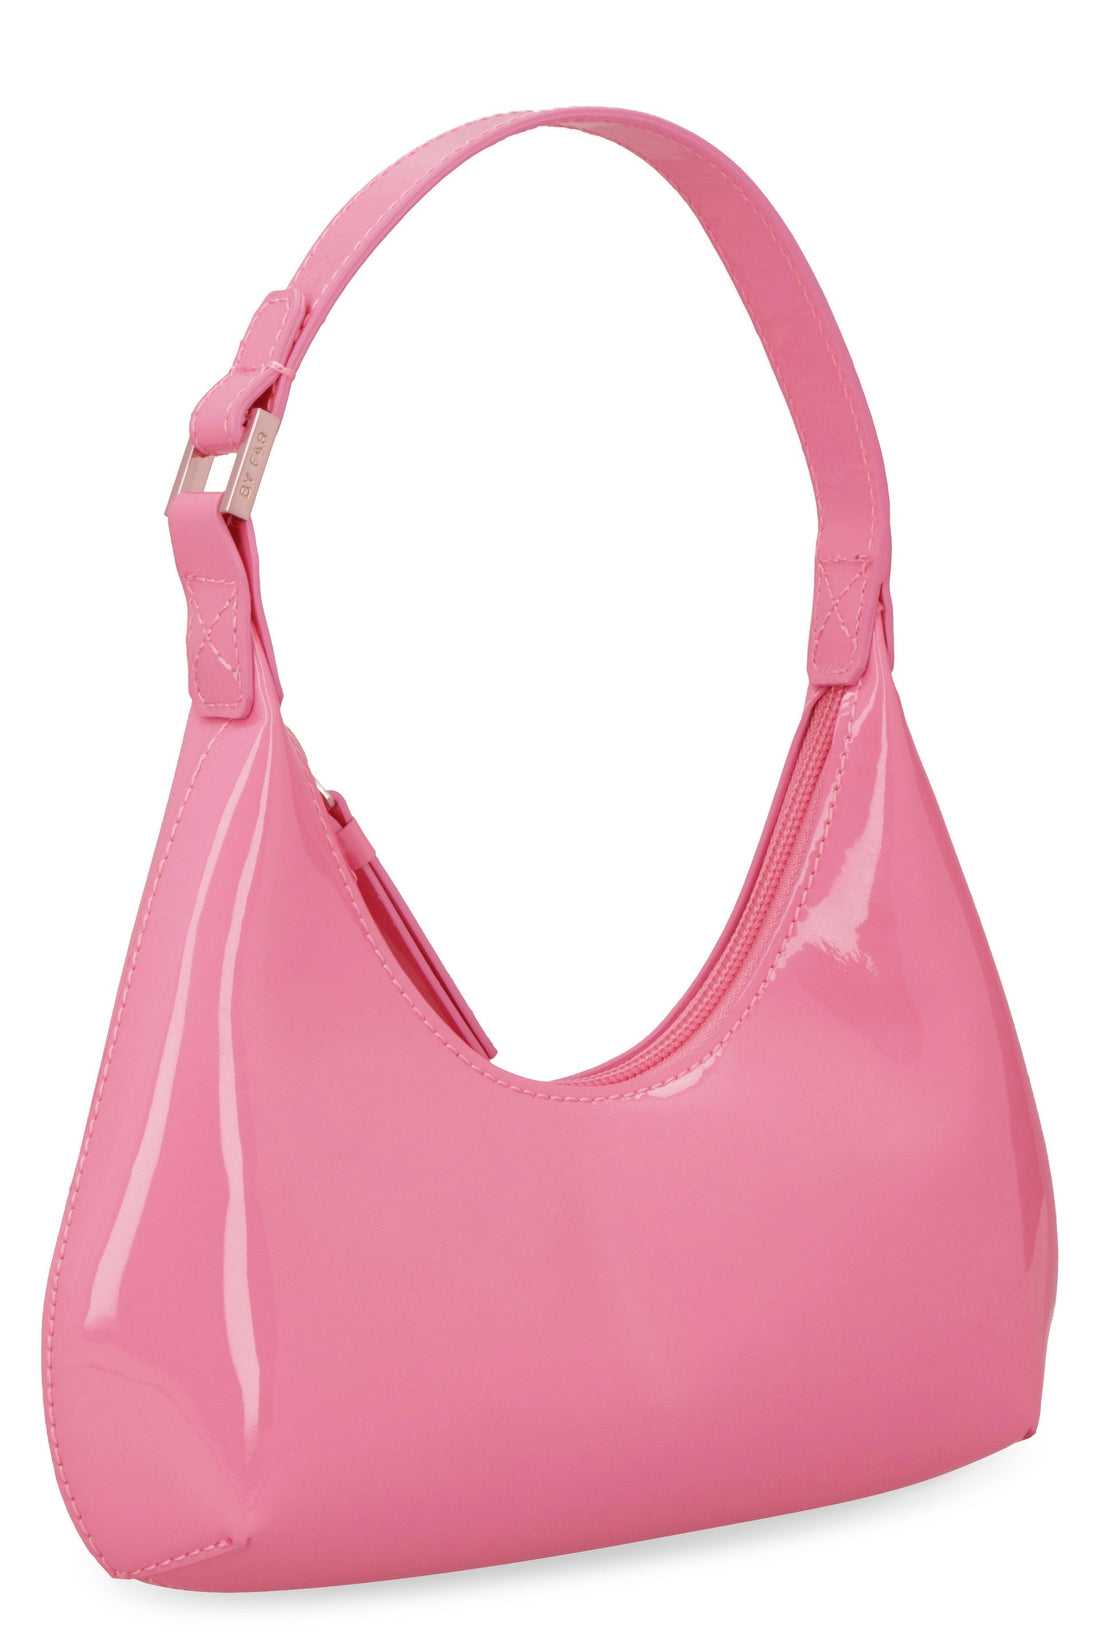 BY FAR-OUTLET-SALE-Baby Amber patent leather handbag-ARCHIVIST